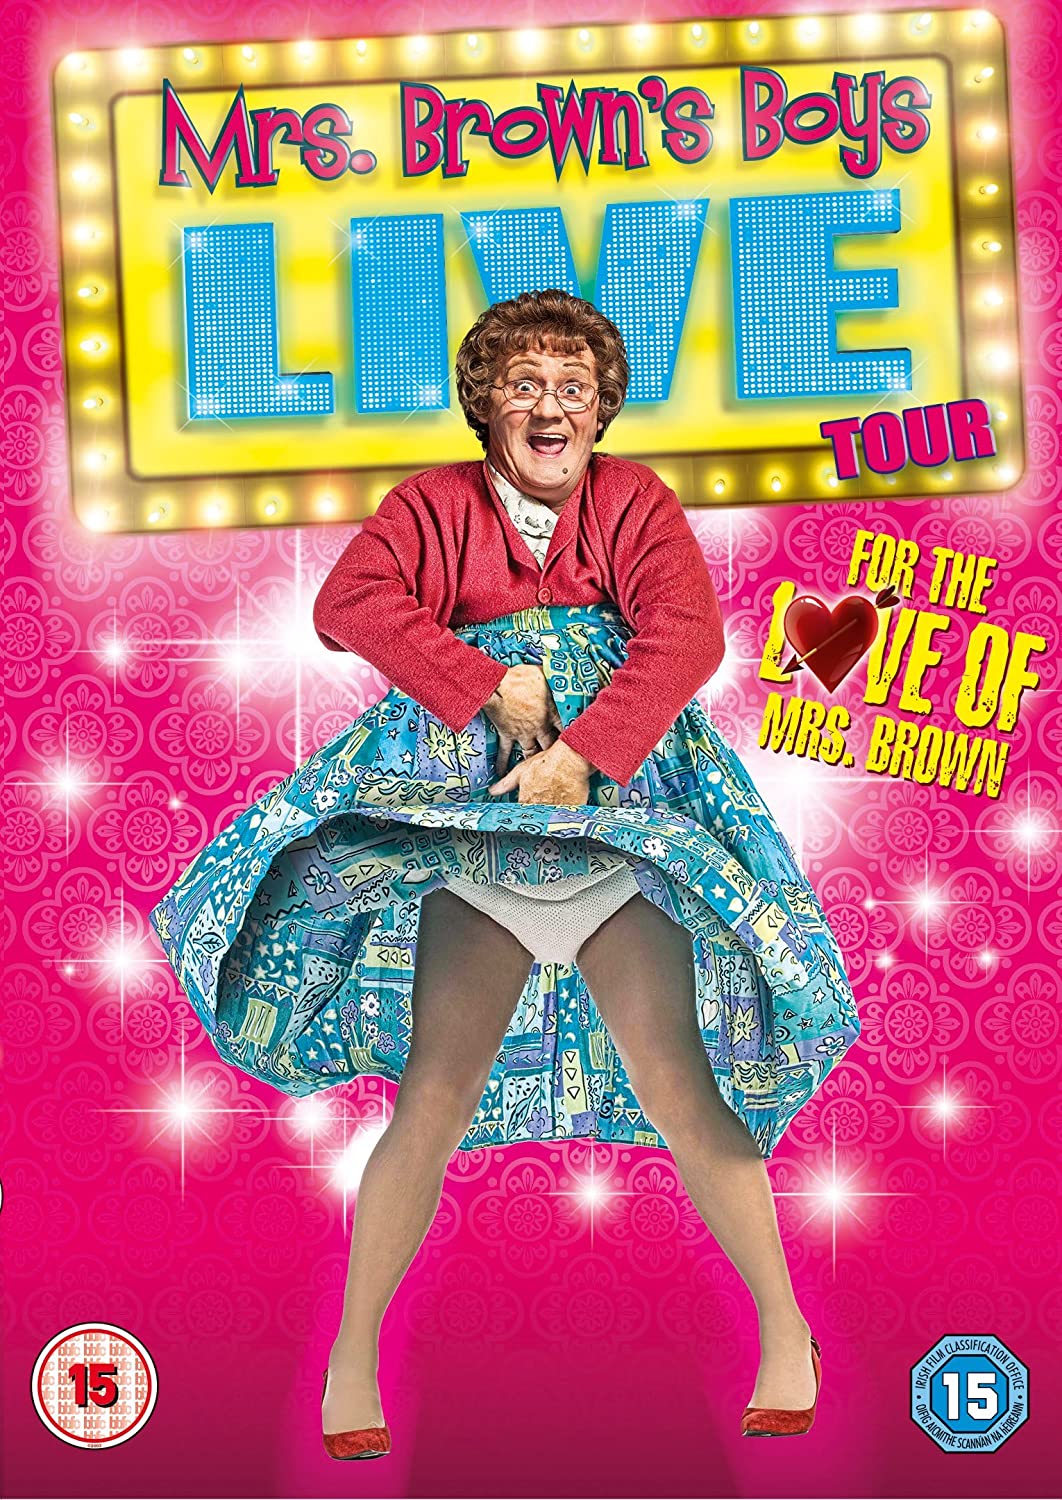 Mrs Brown's Boys Live Tour - For the Love of Mrs Brown [2013] - Sitcom [DVD]